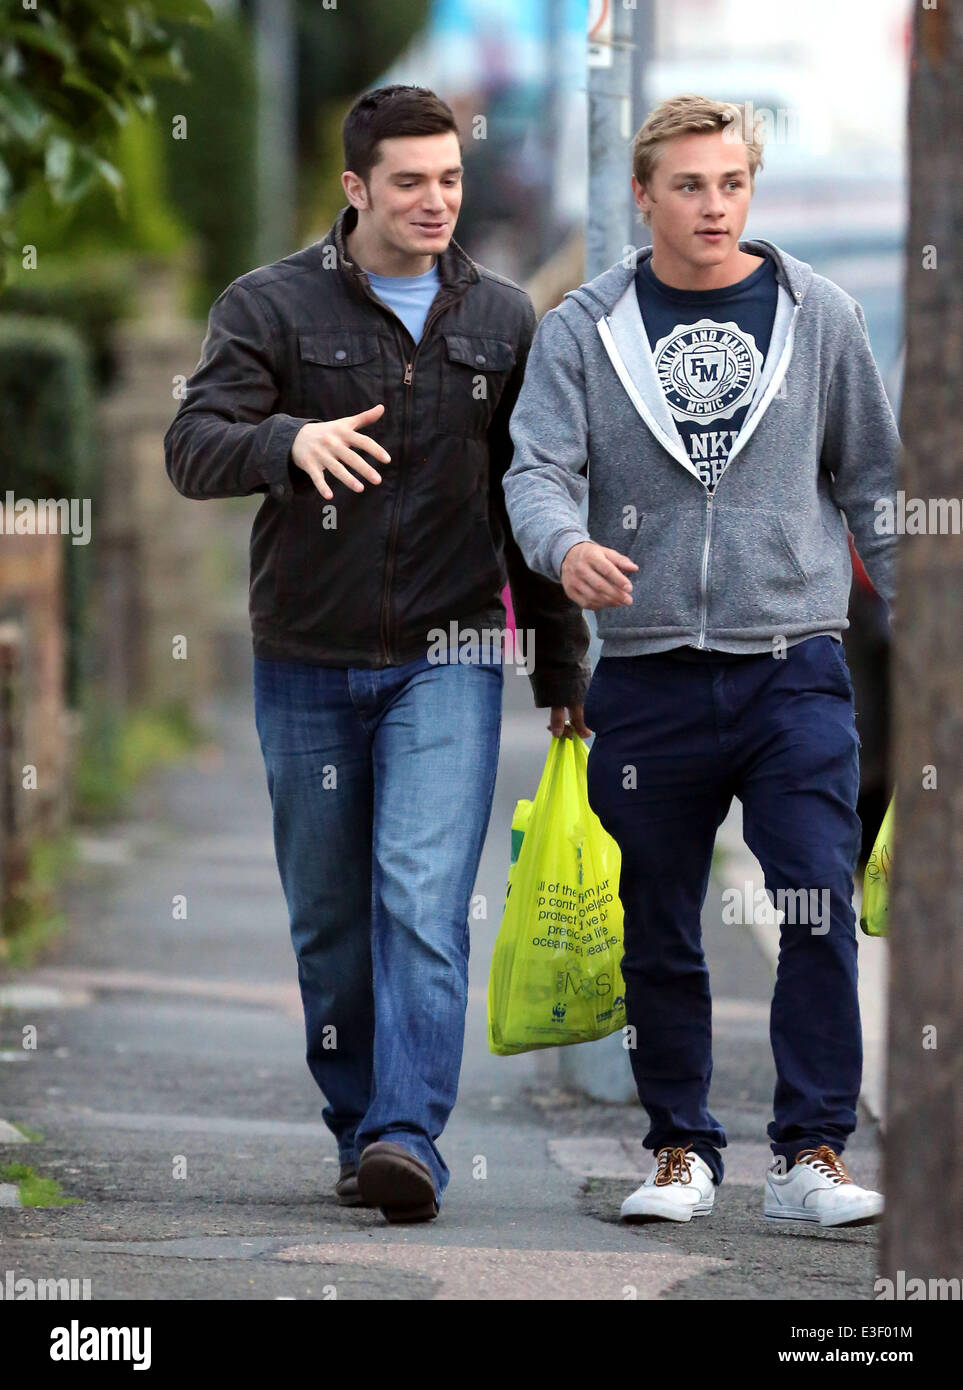 Eastender cast members, Ben Hardy and David Witts seen taking a break from filming at Elstree. David has been told he will be cut from the show.  Featuring: Ben Hardy,David Witts Where: London, United Kingdom When: 24 Oct 2013 Stock Photo